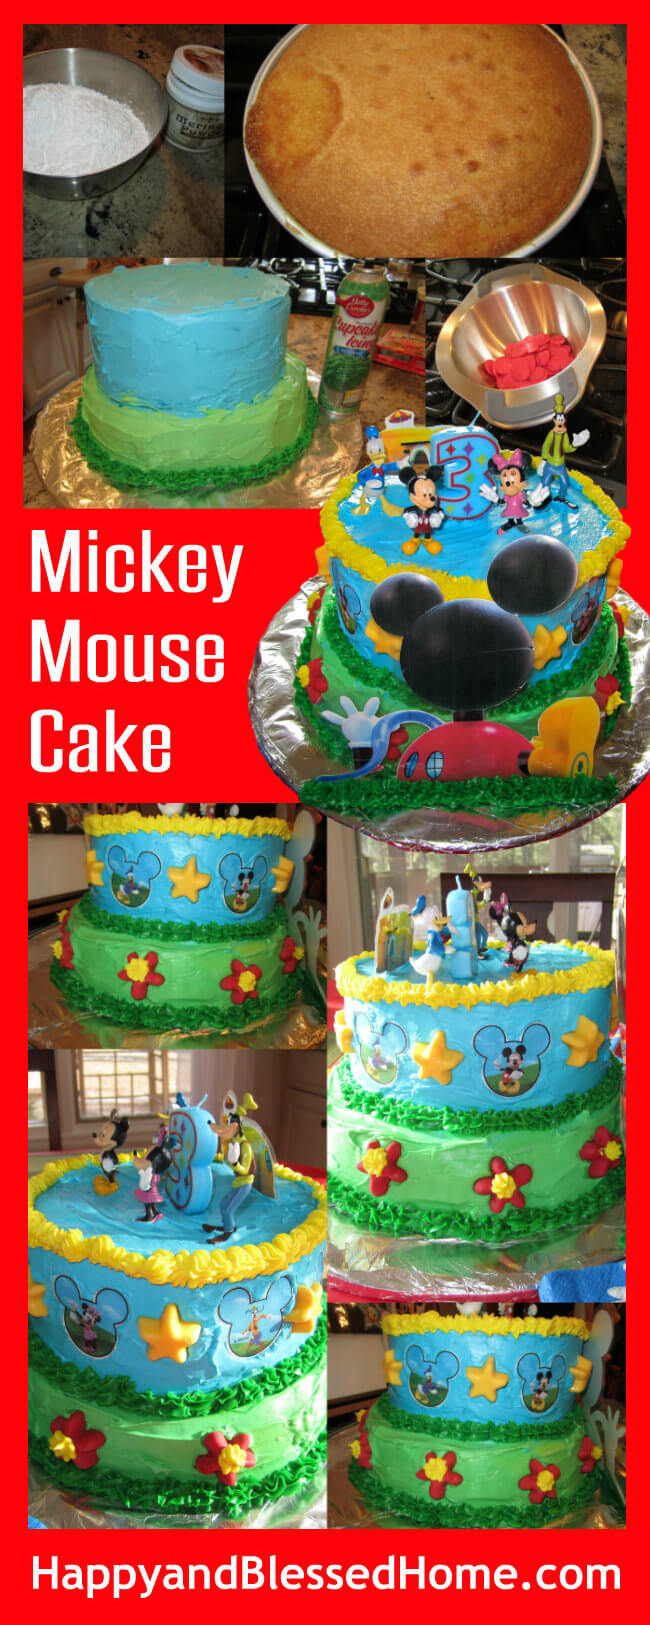 DIY Mickey Mouse Cake Recipe and Ingredients for a Mickey Mouse Birthday Party from HappyandBlessedHome.com